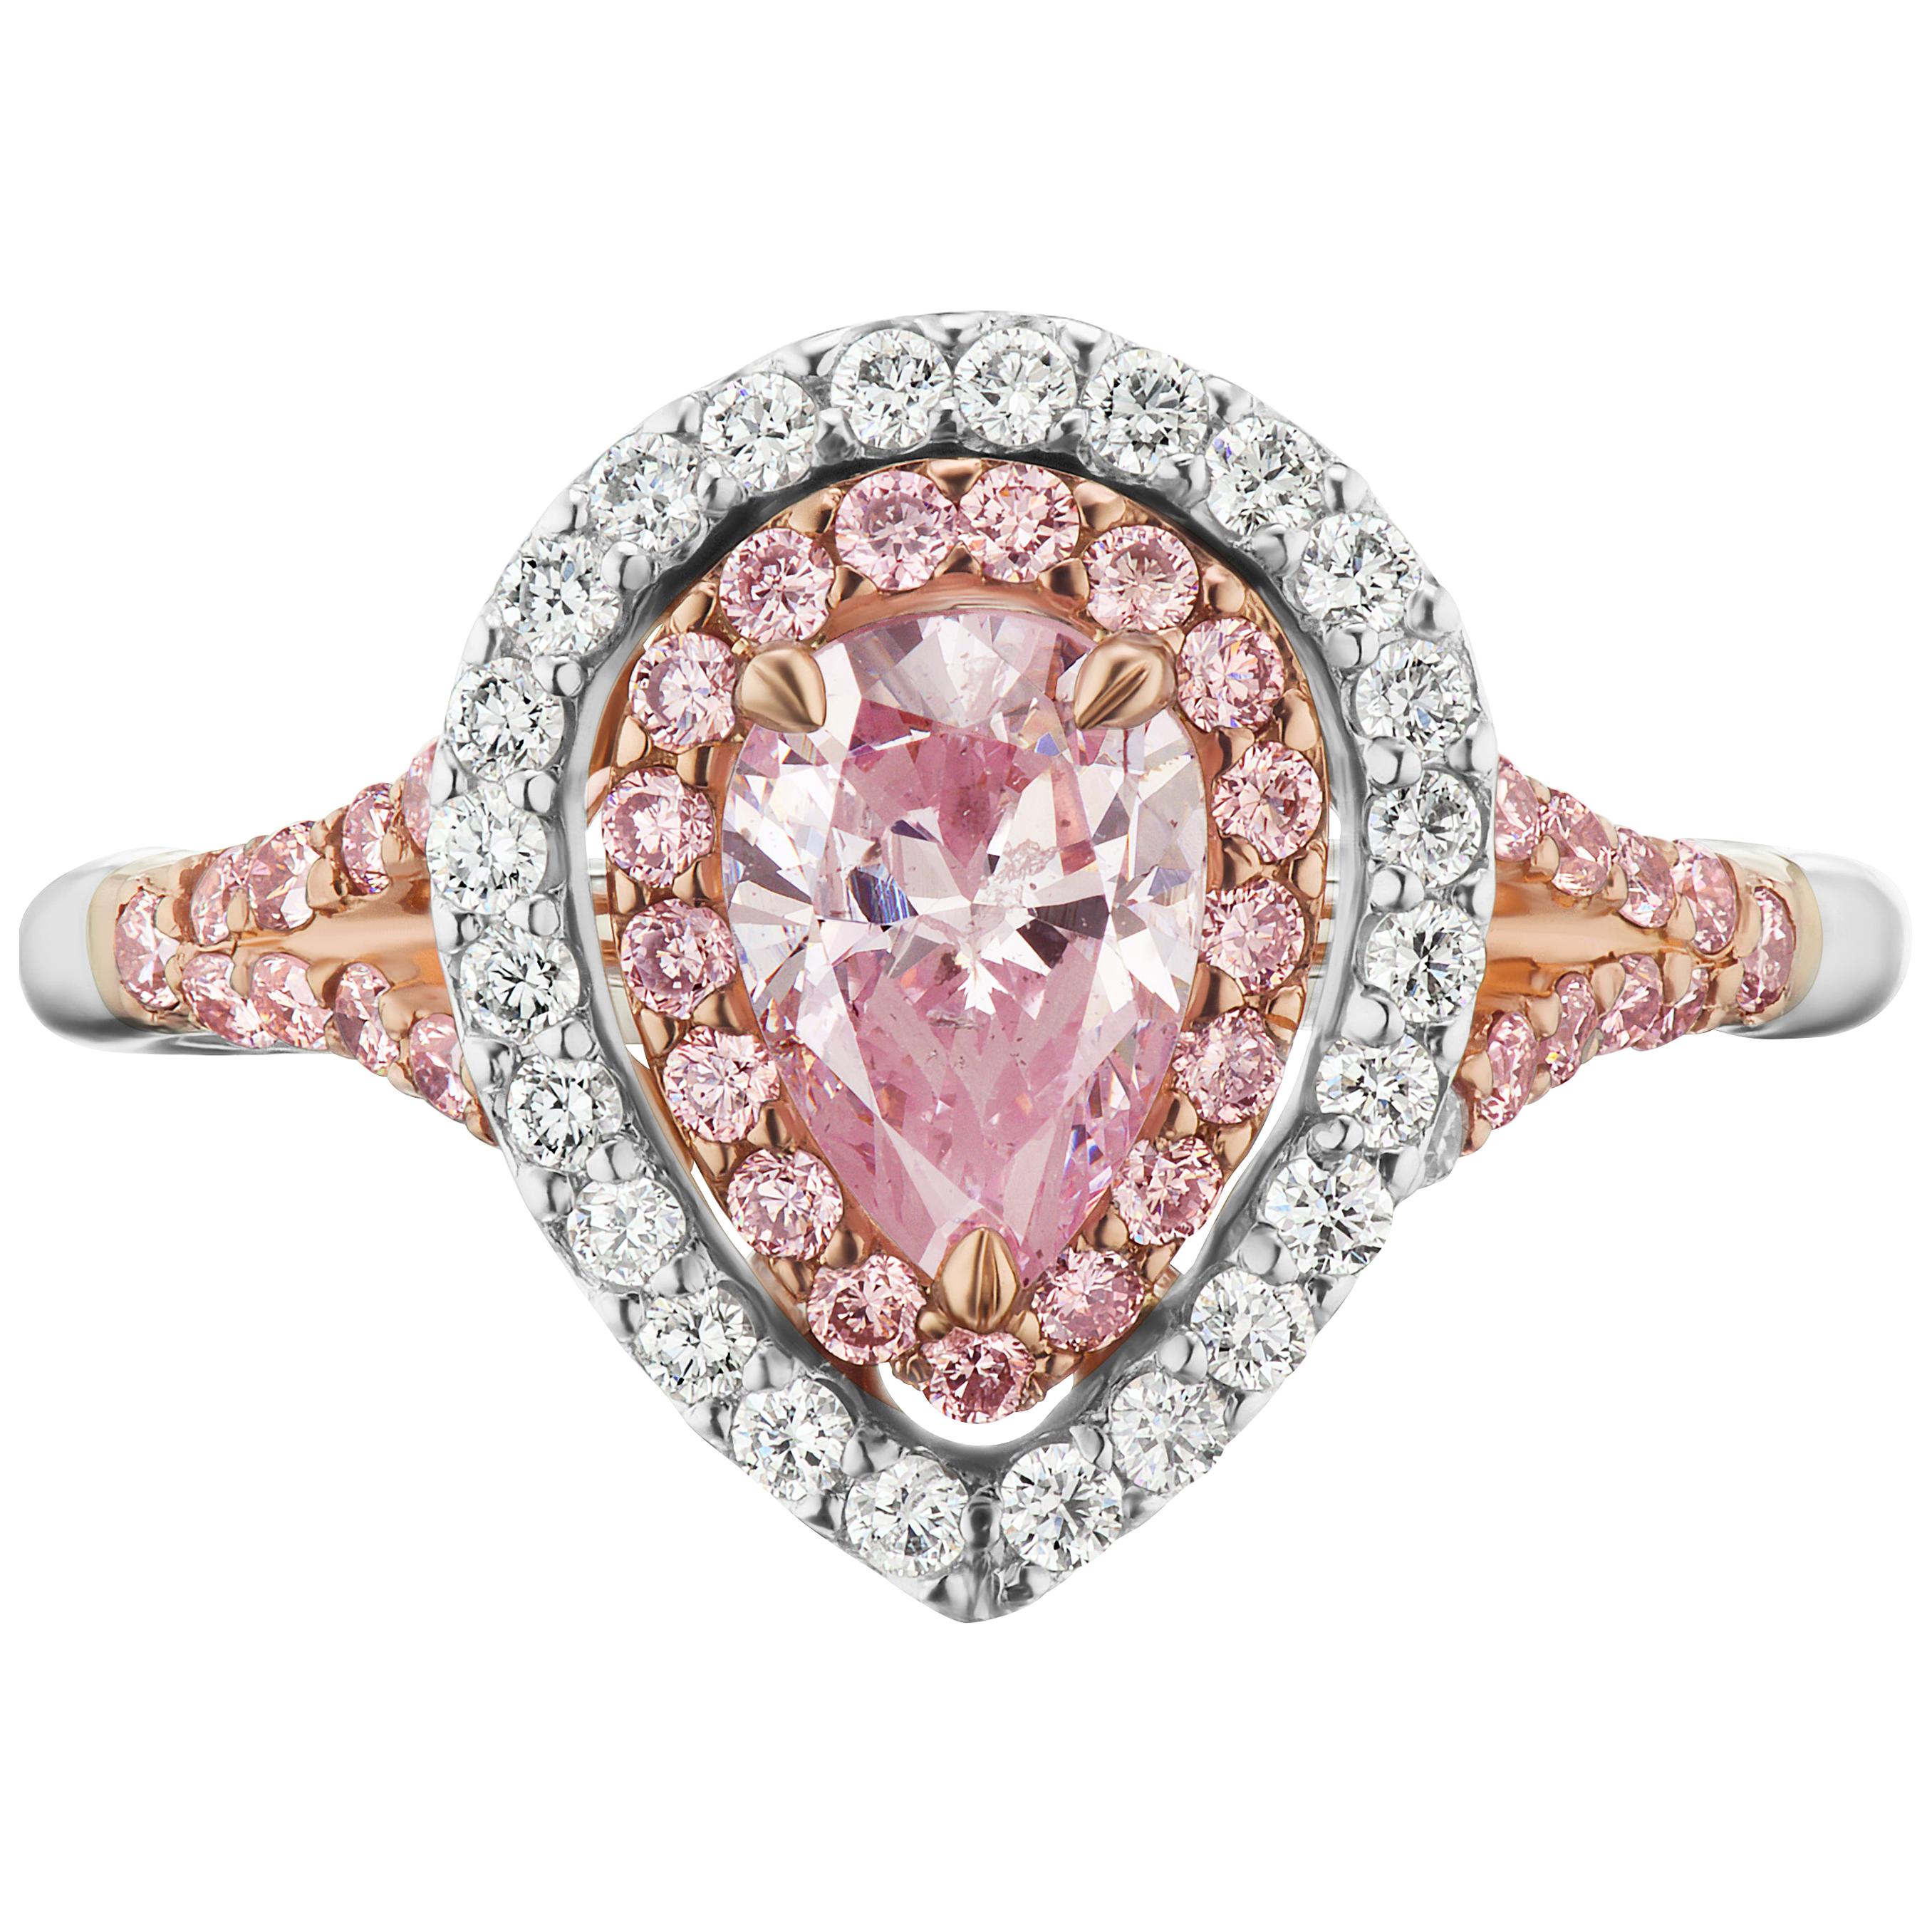 Fancy Intense Purple-Pink .81ct Pear Diamond GIA Cert. Halo Ring For Sale